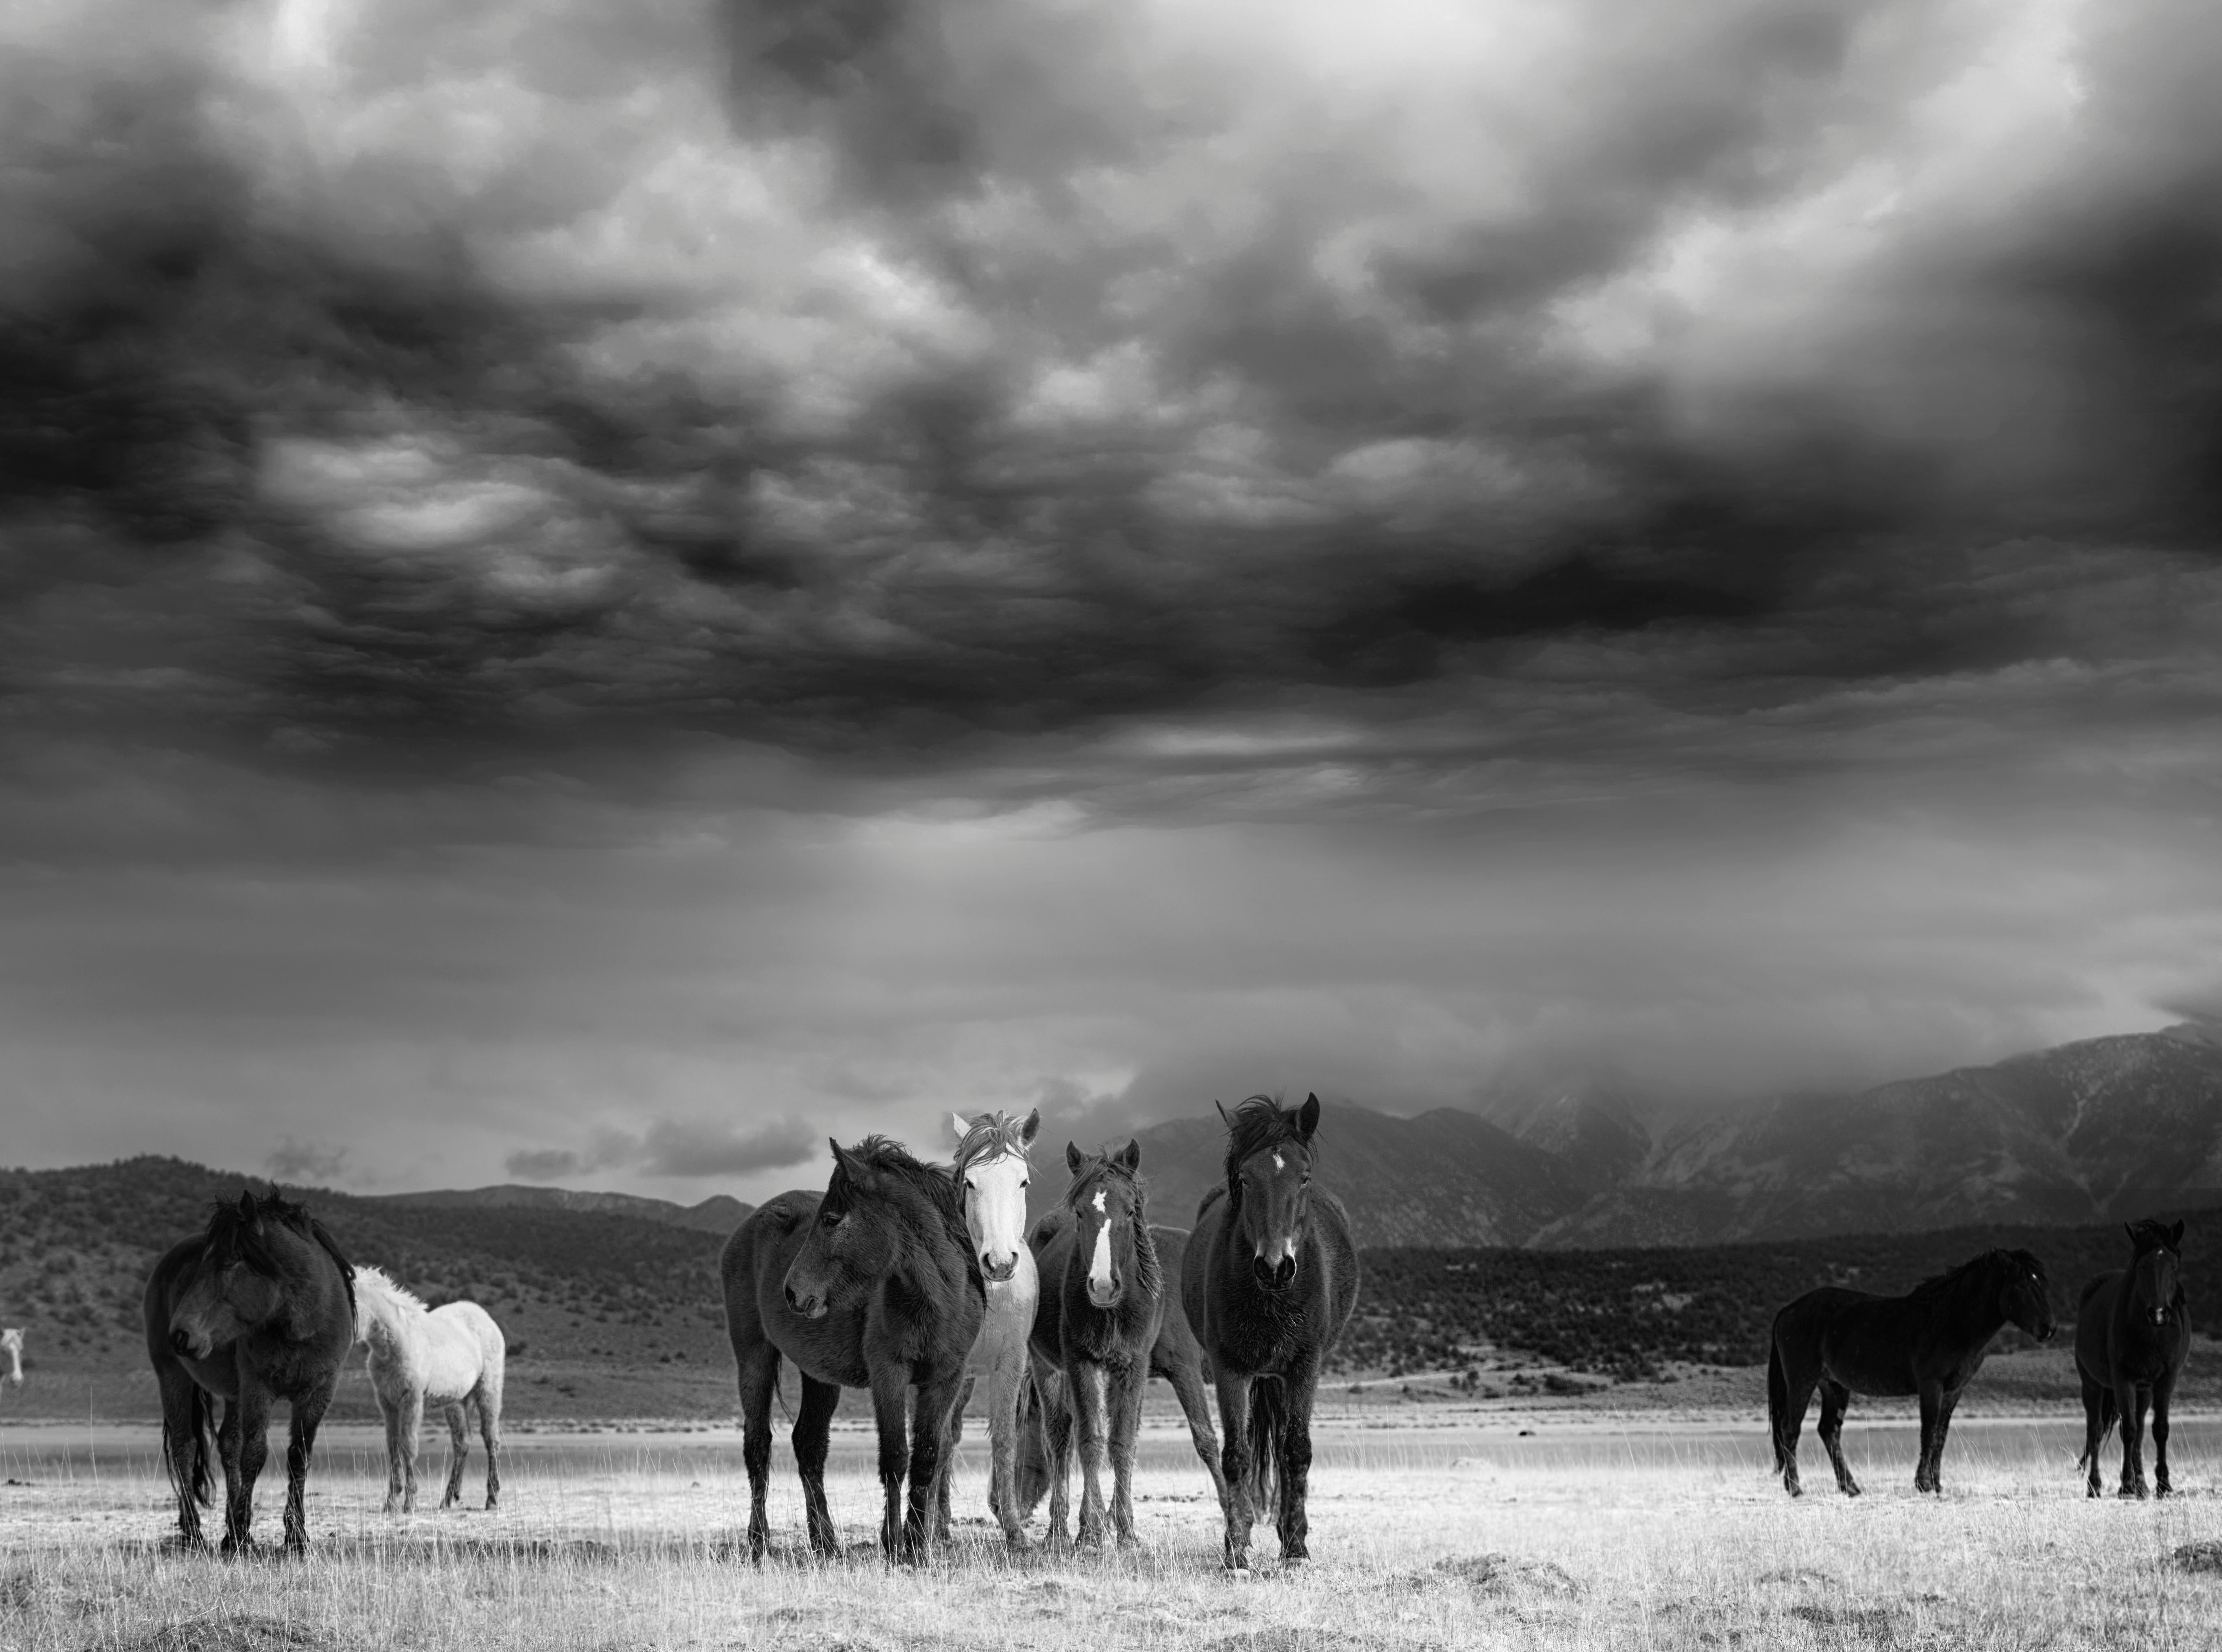 This is a contemporary black and white photograph of American Wild Mustangs. 
"They represent the ultimate expression of American freedom" - Wild Horses
Printed in archival luster paper w archival inks
Signed and numbered by artist.
Edition of